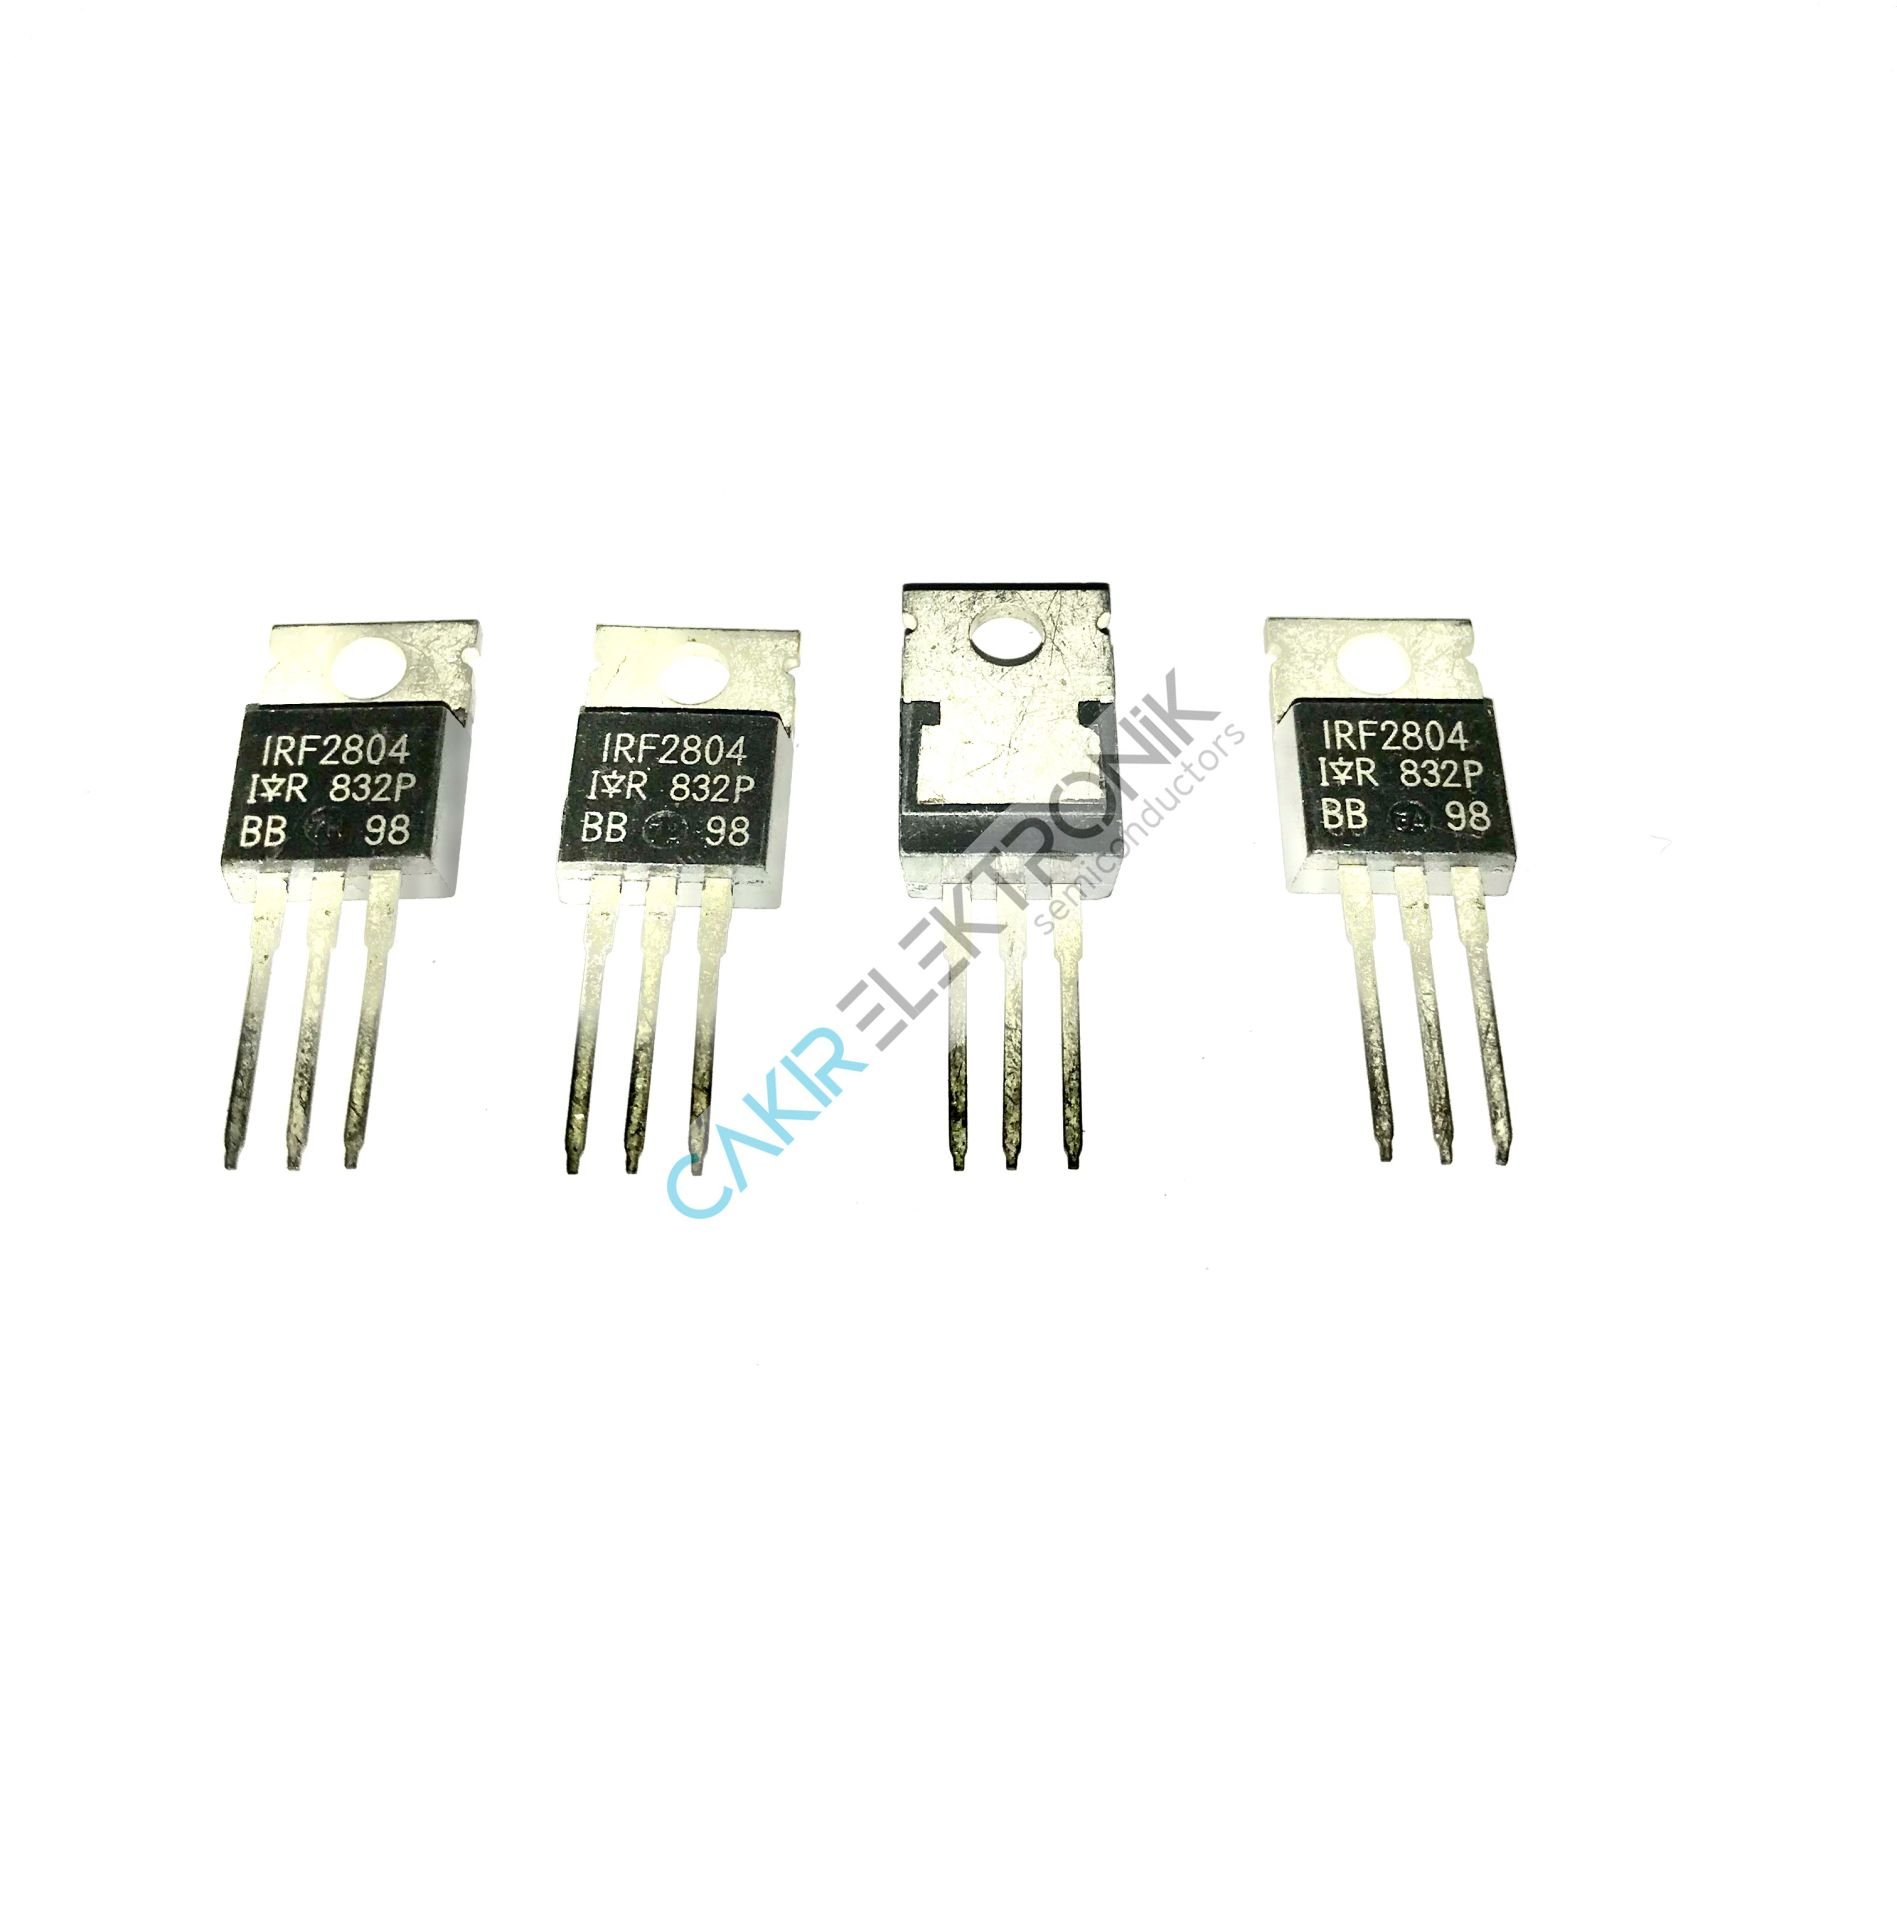 IRF2804 - 280A. 40 V MOSFET - TO220 Mofset